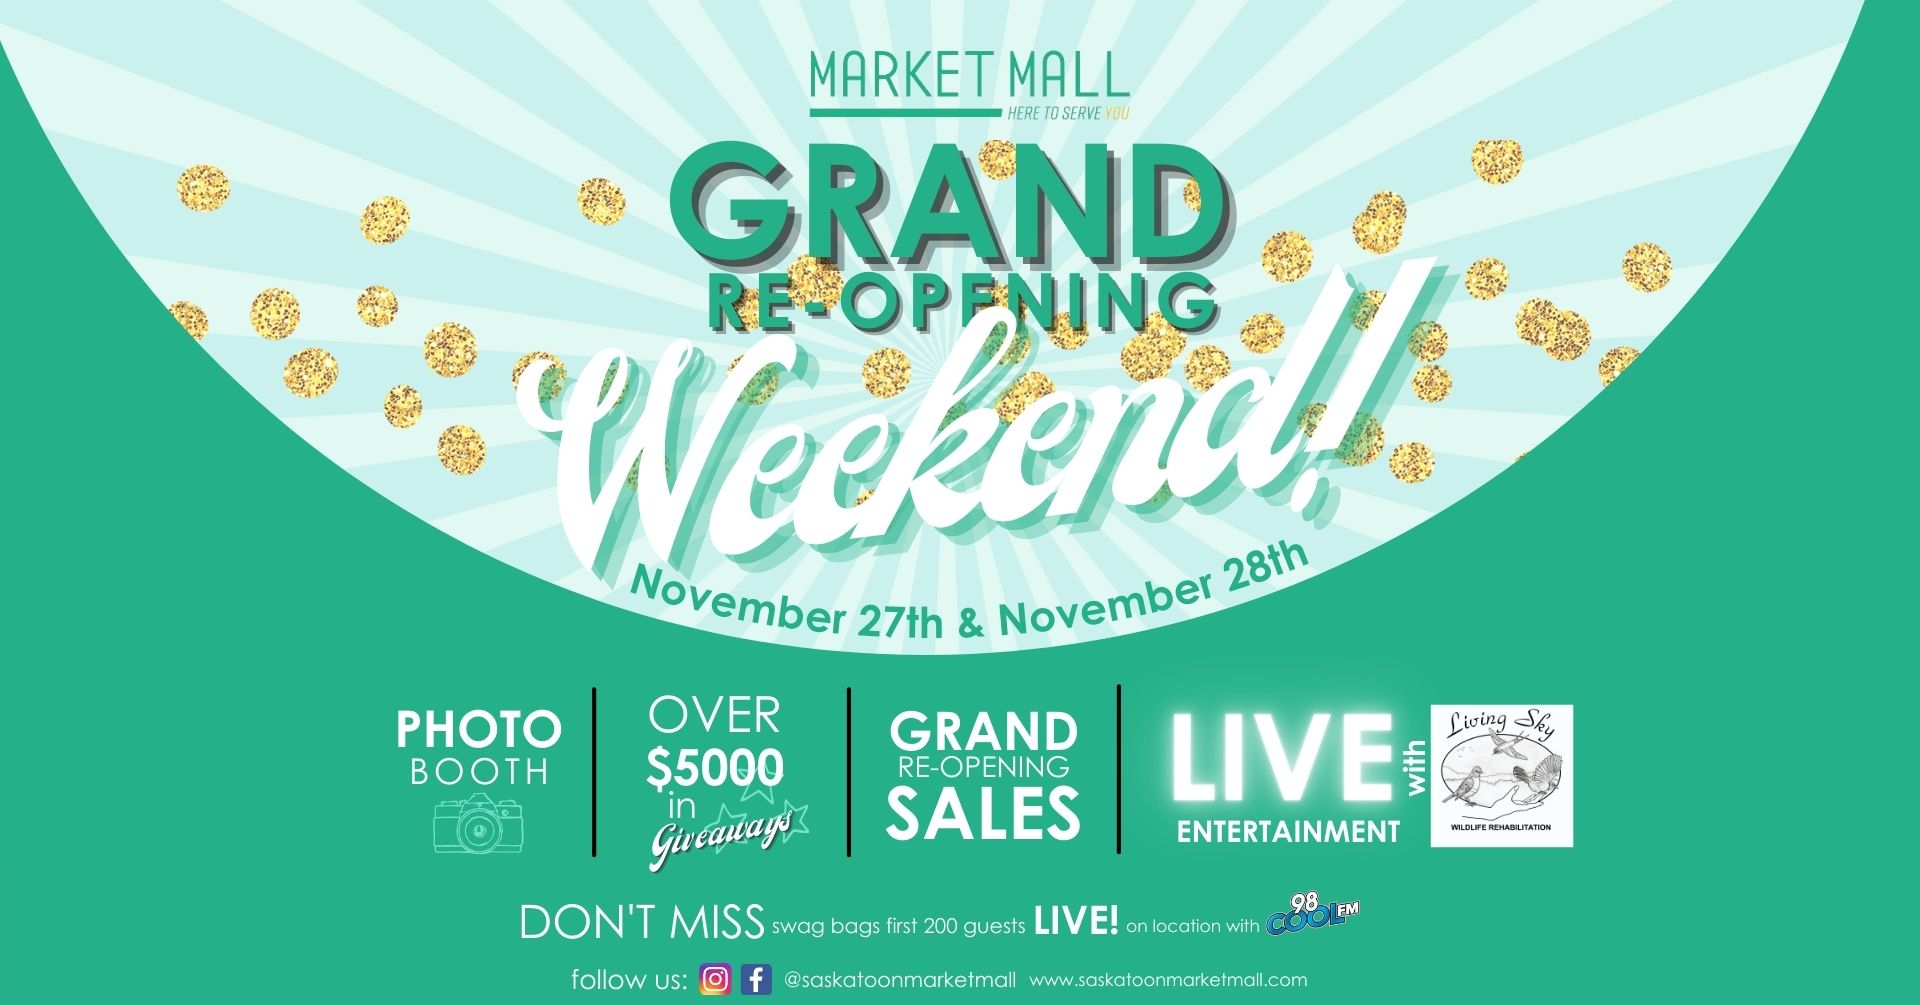 Market Mall Grand Re-Opening Weekend